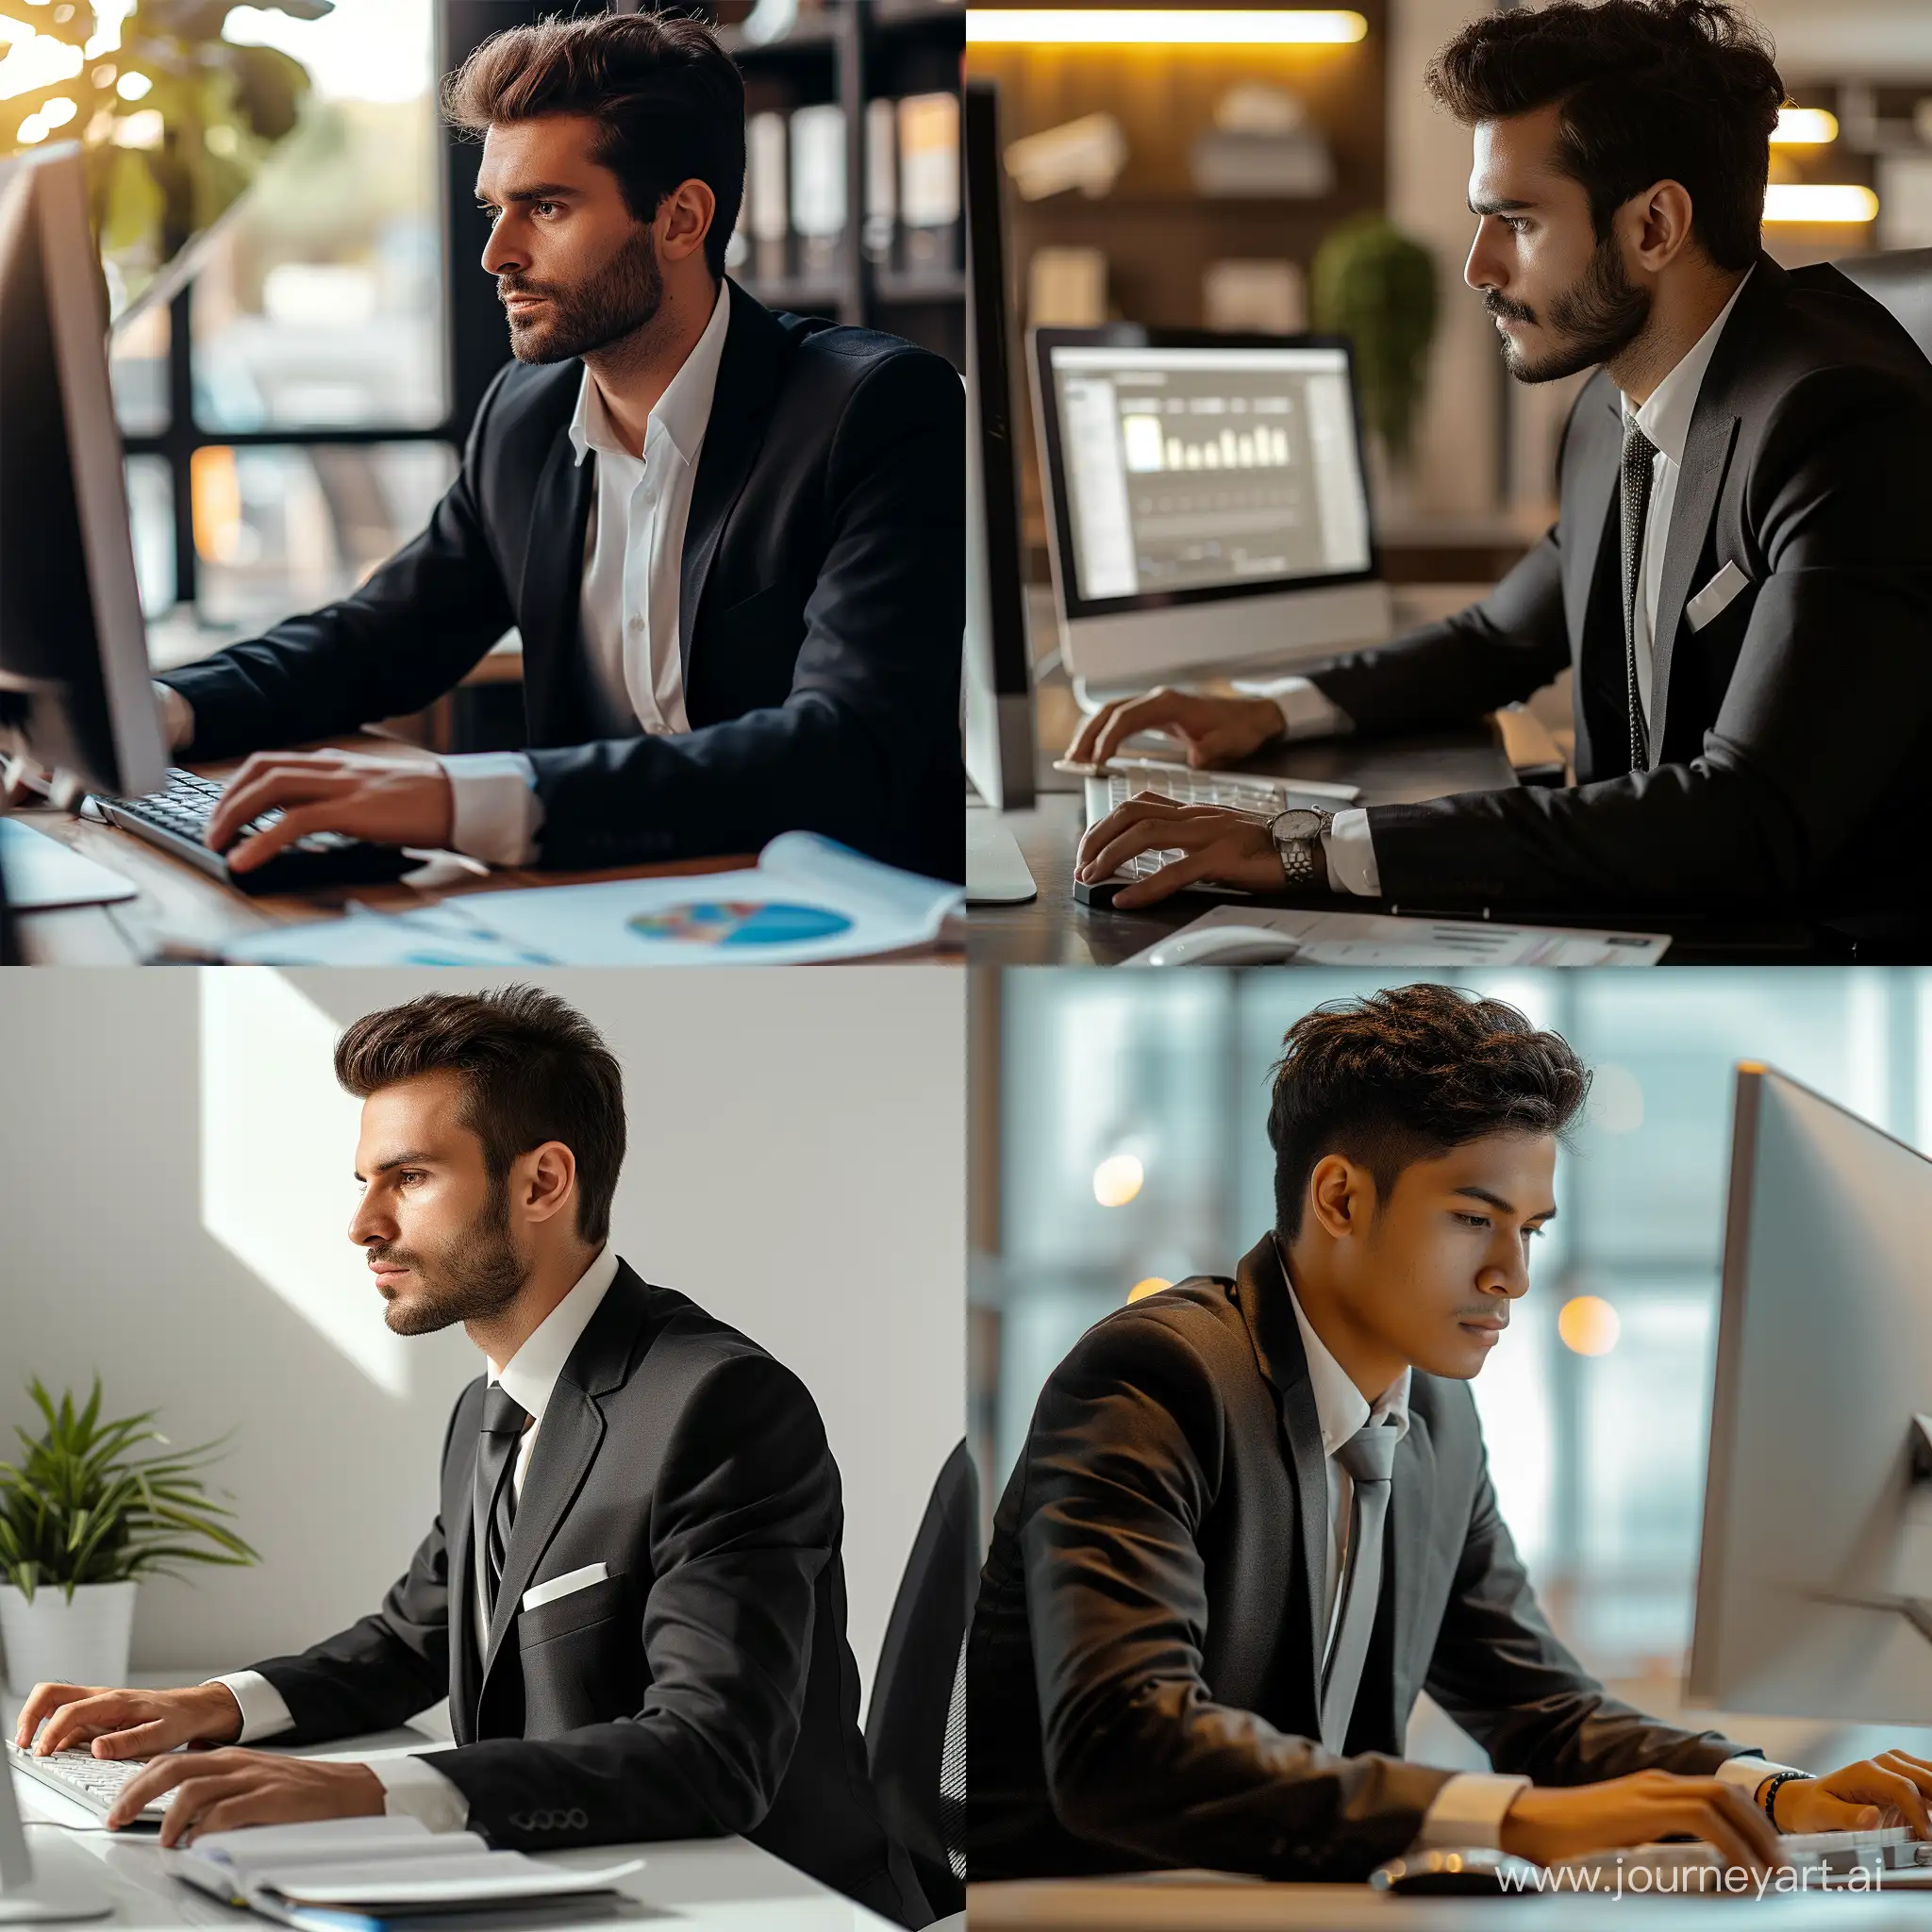 Businessman-in-Suit-Working-on-Computer